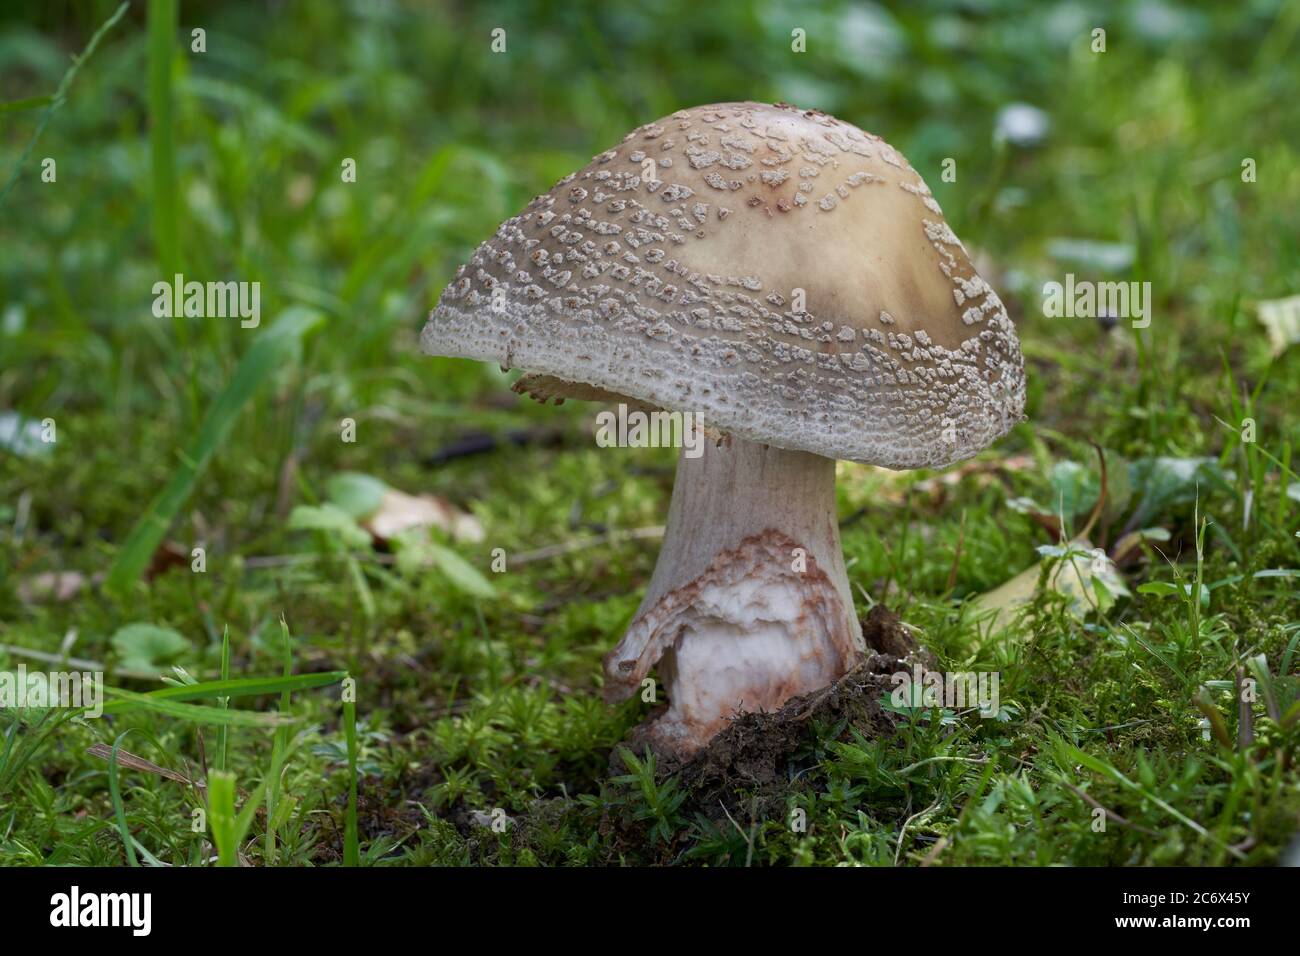 Edible mushroom Amanita rubescens in the meadow under spruce tree. Known as blusher mushroom. Wild mushroom growing in the grass and moss. Stock Photo